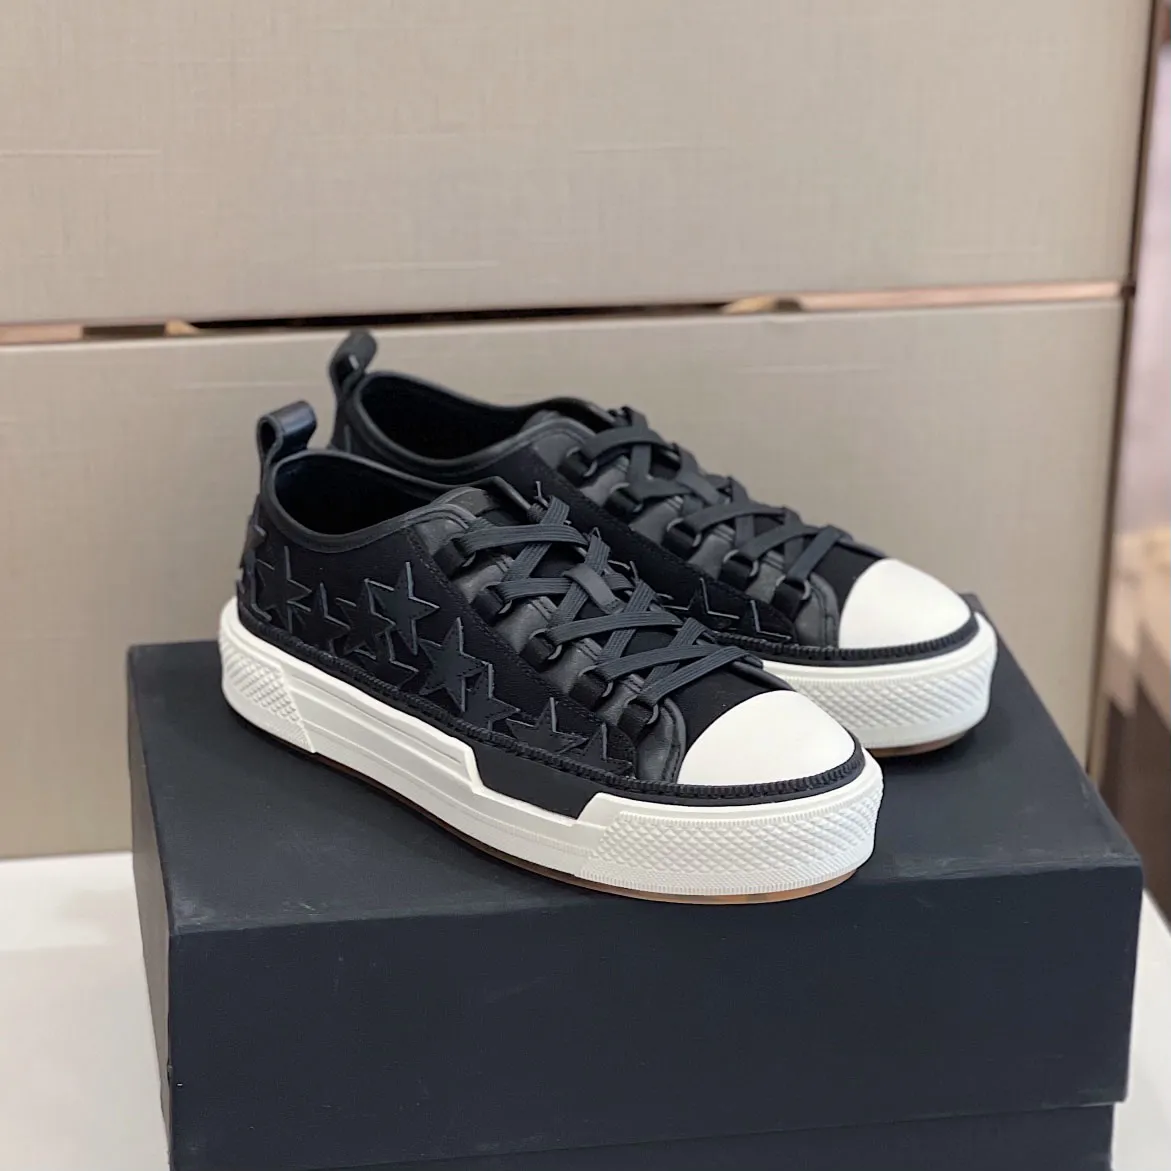 Fashion Shoes Stars Court Low Sneakers Lace-up Canvas Trainers Embroidery Logo Los Angeles Street Style Stars Patches Ami Ri A Miri Original Box 35-45 Unisex